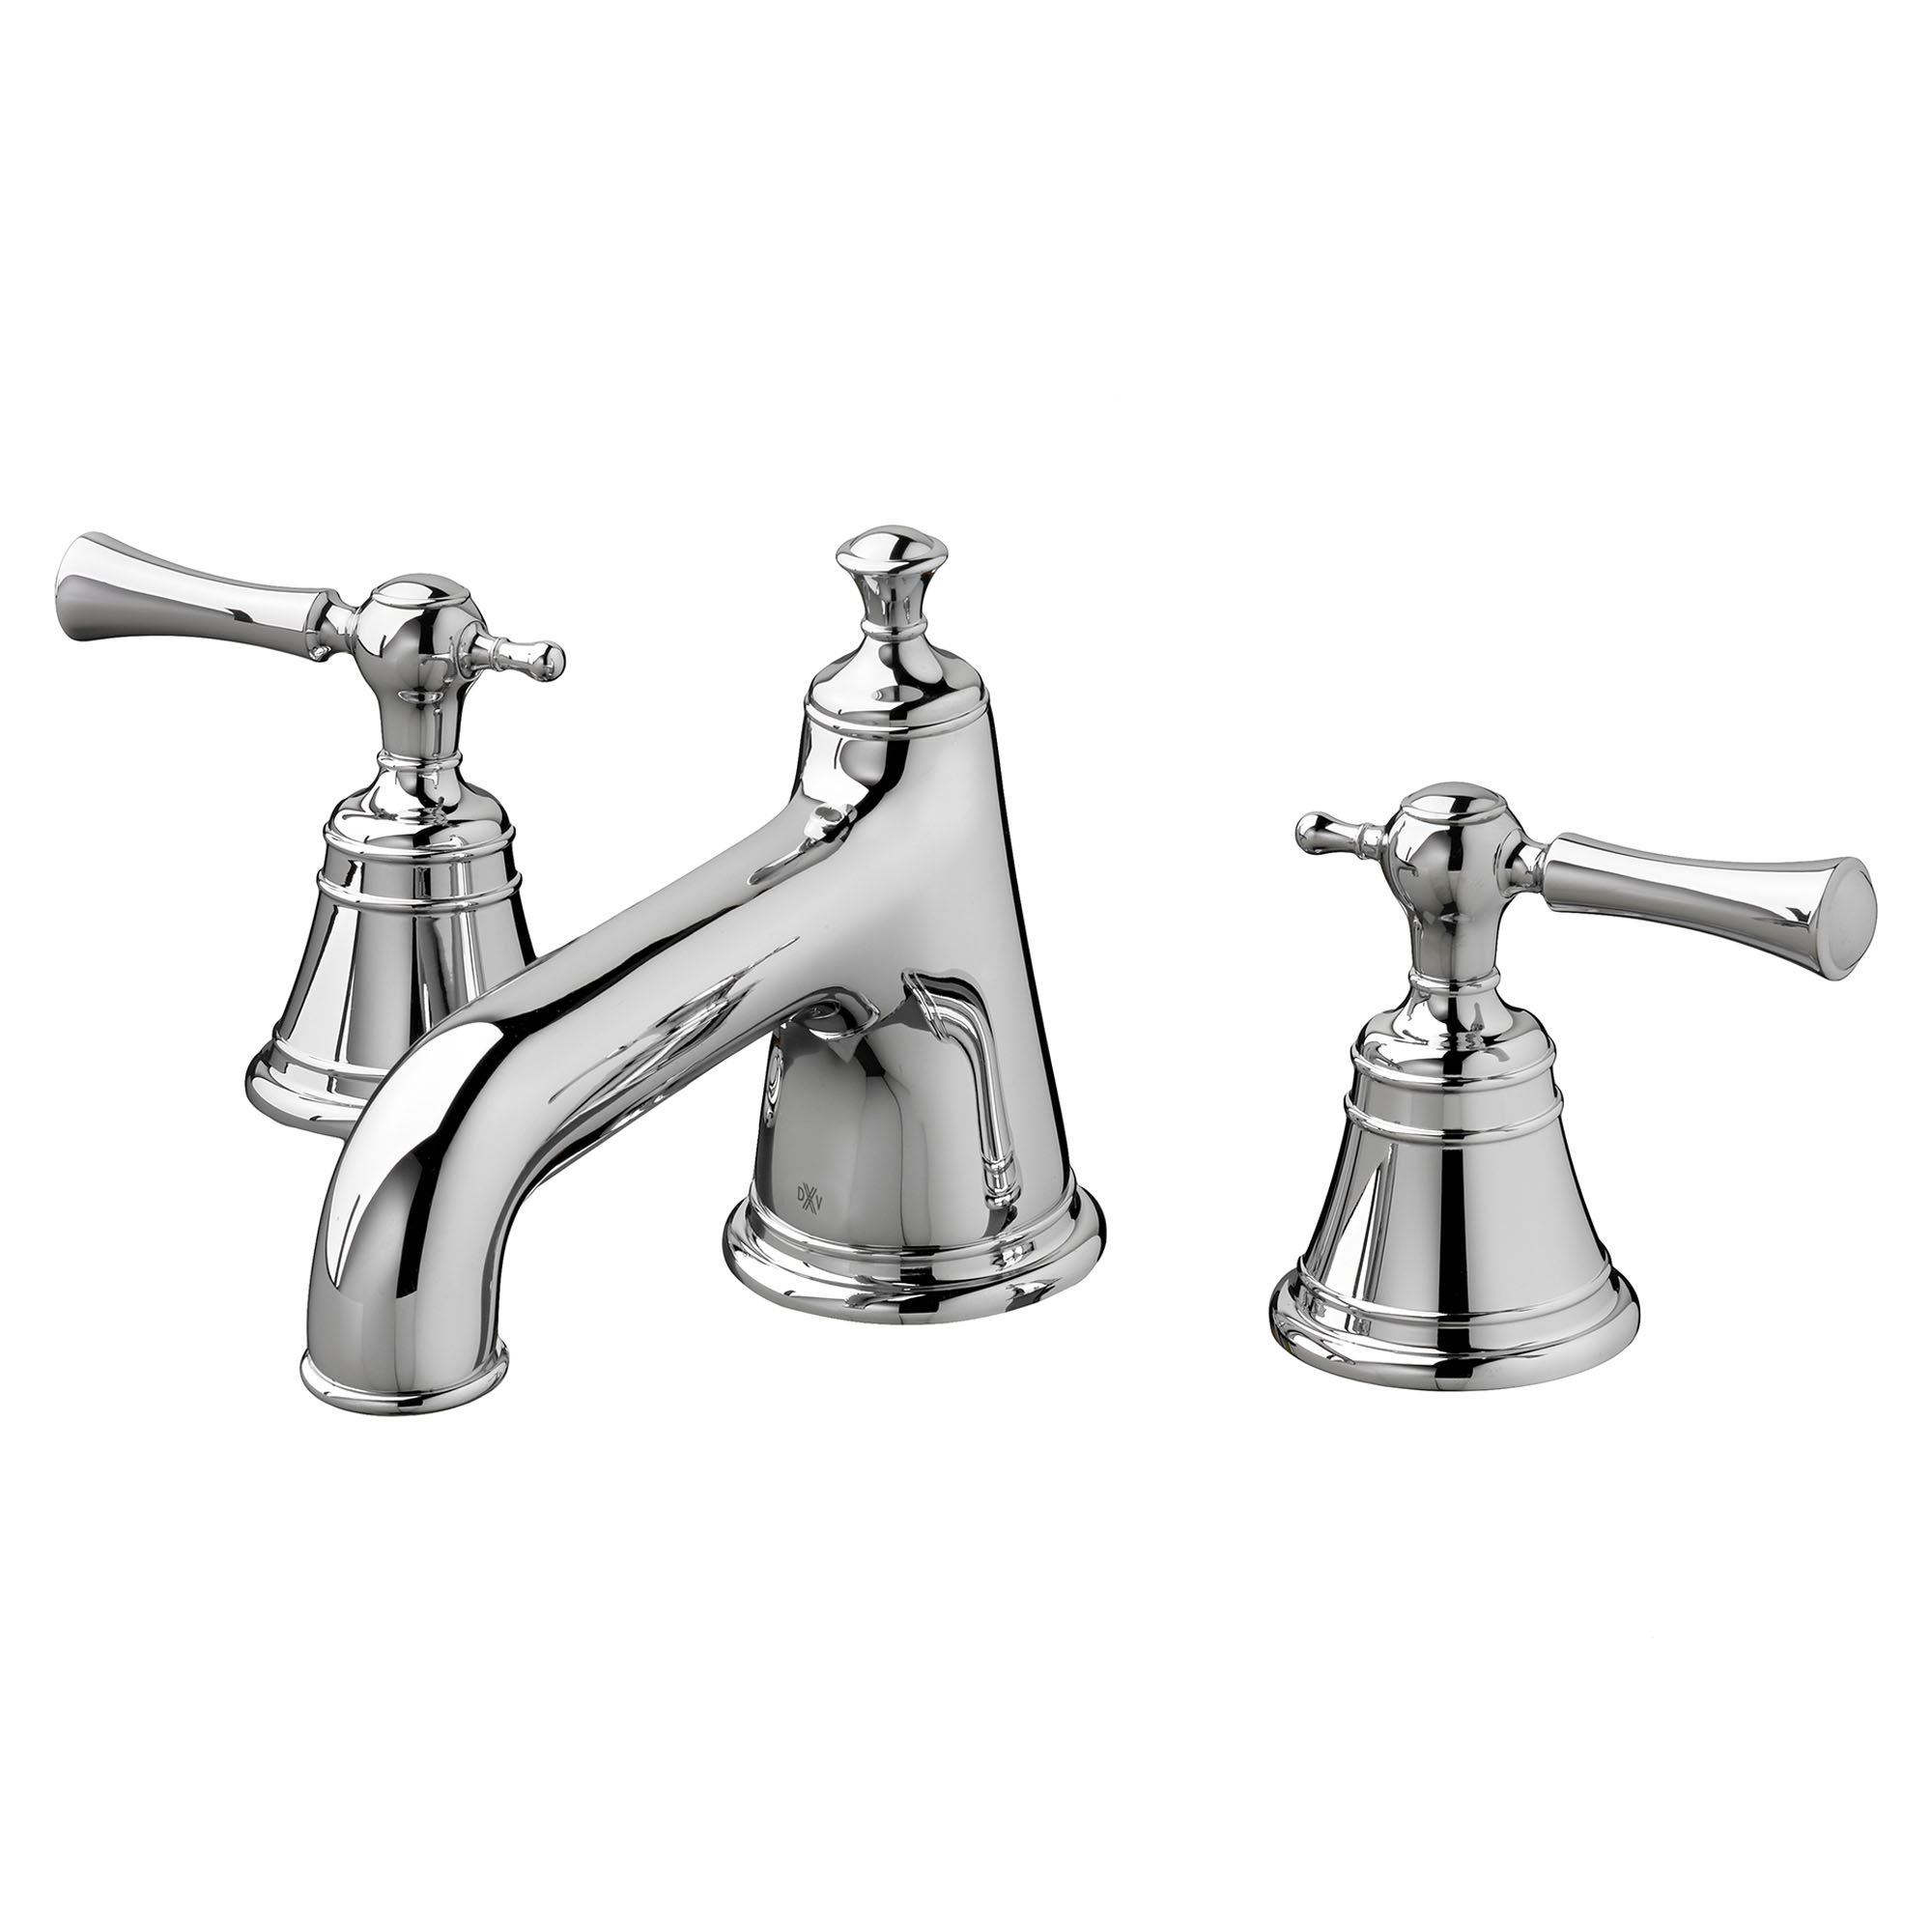 Randall 2-Handle Widespread Bathroom Faucet with Lever Handles